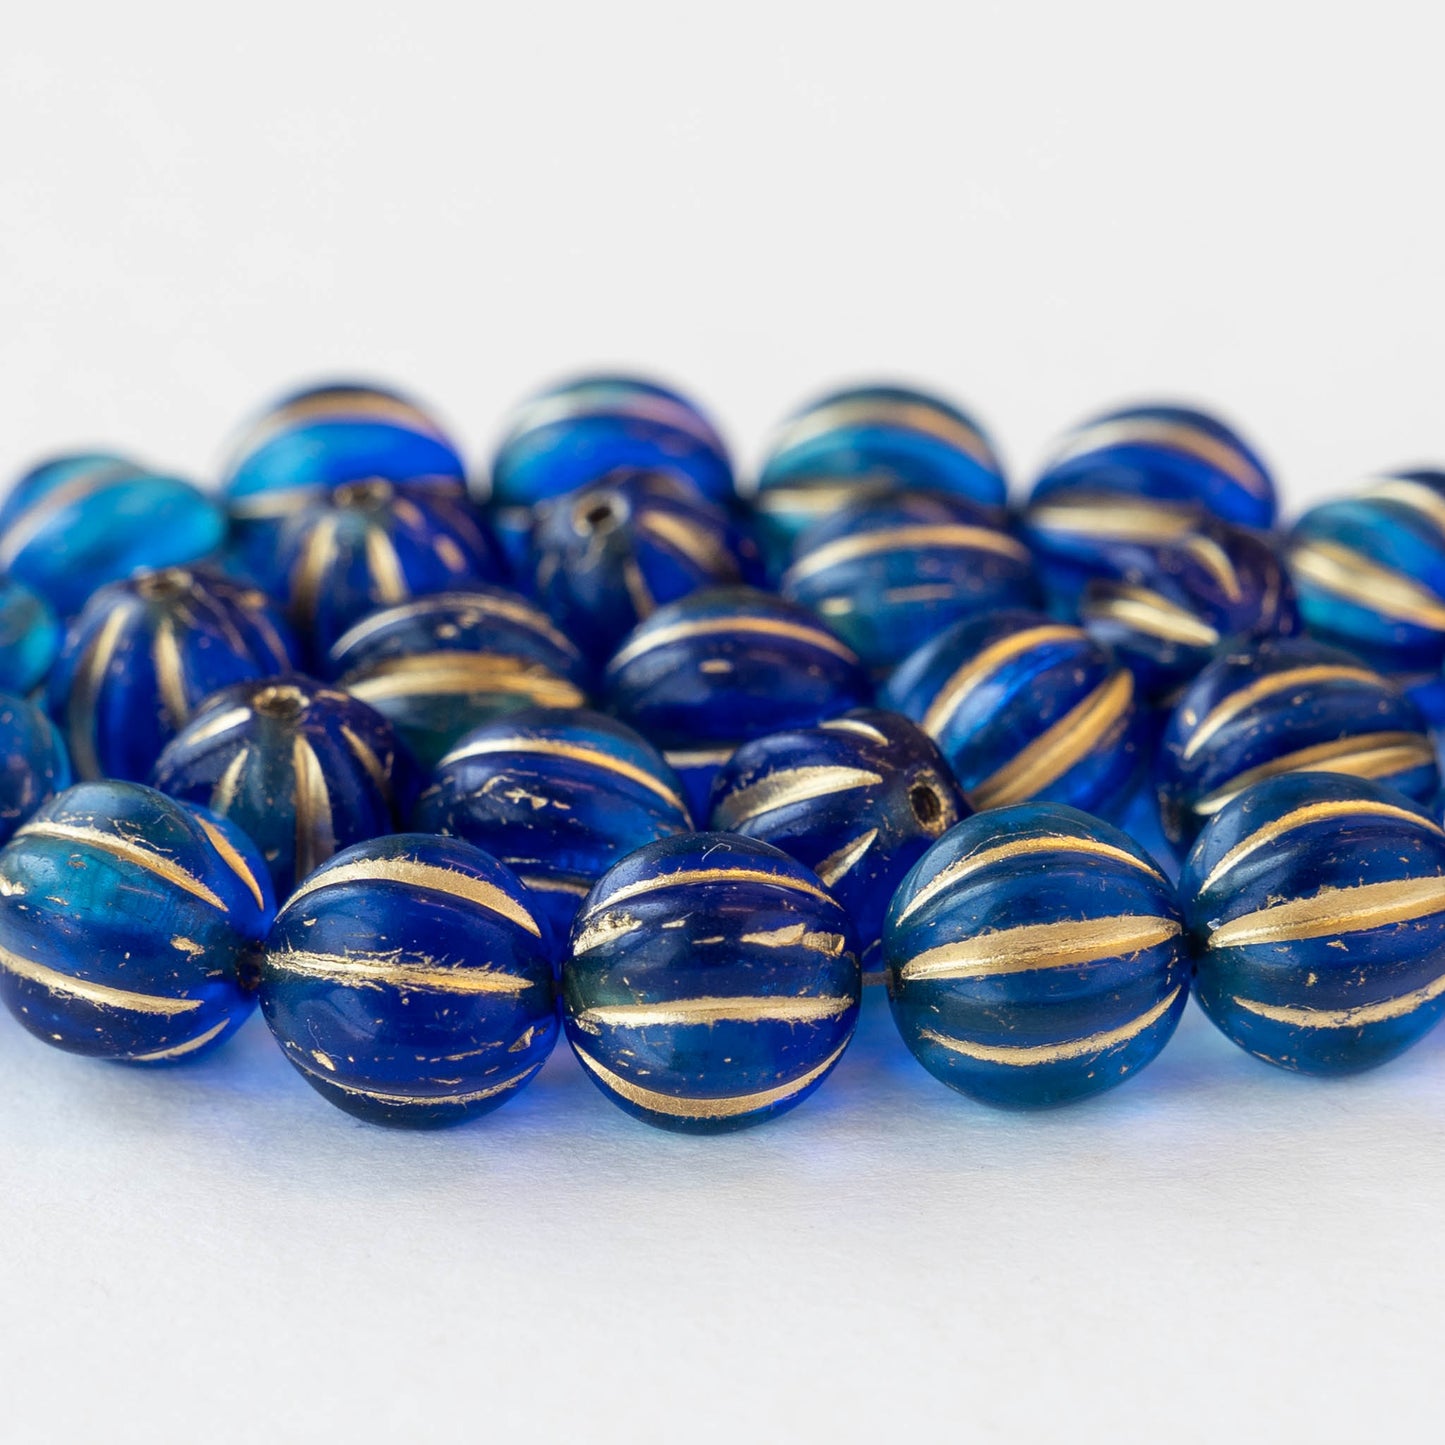 10mm Melon Beads -  Sapphire Blue with Gold Wash - 15 Beads